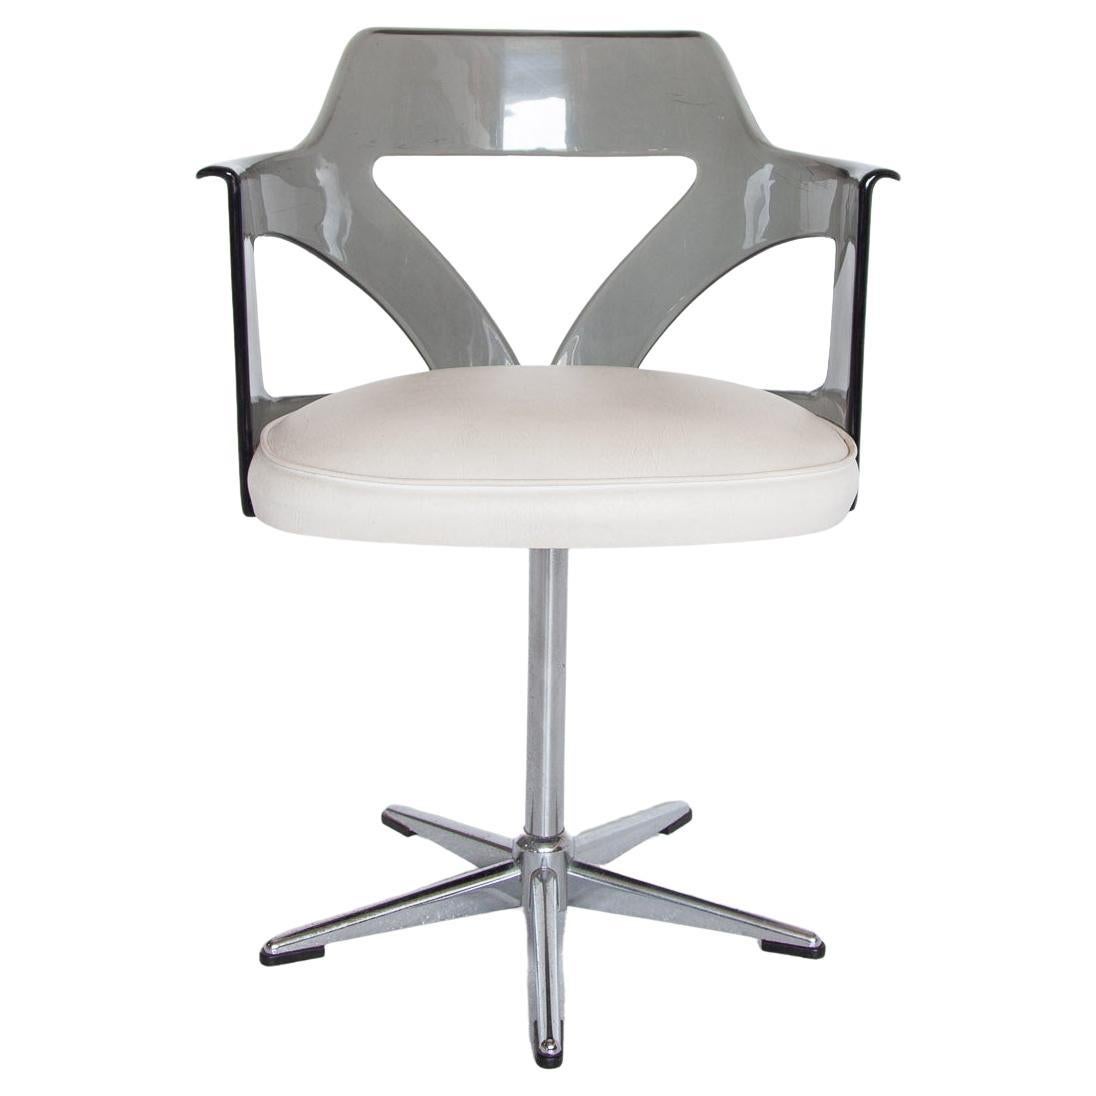 Spage Age Smoked Plexi Glass Swivel Desk Chair, 1960s For Sale